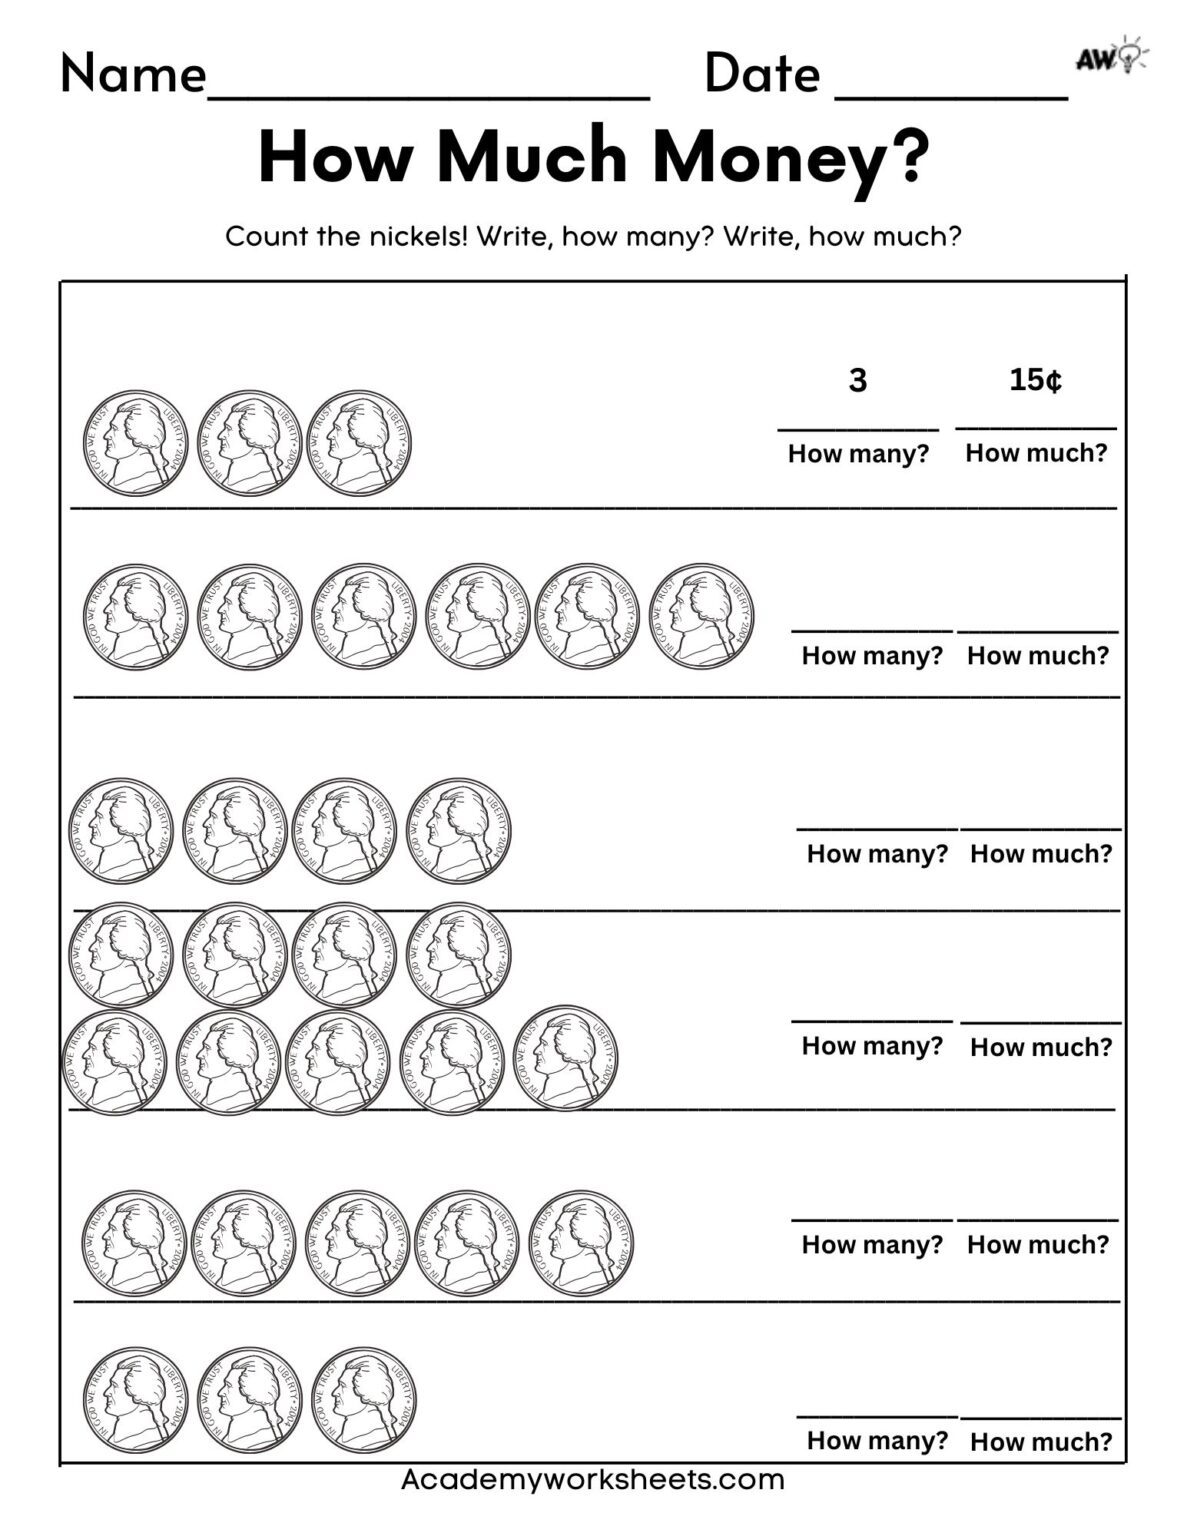 the-best-value-of-coins-worksheet-counting-nickels-academy-worksheets